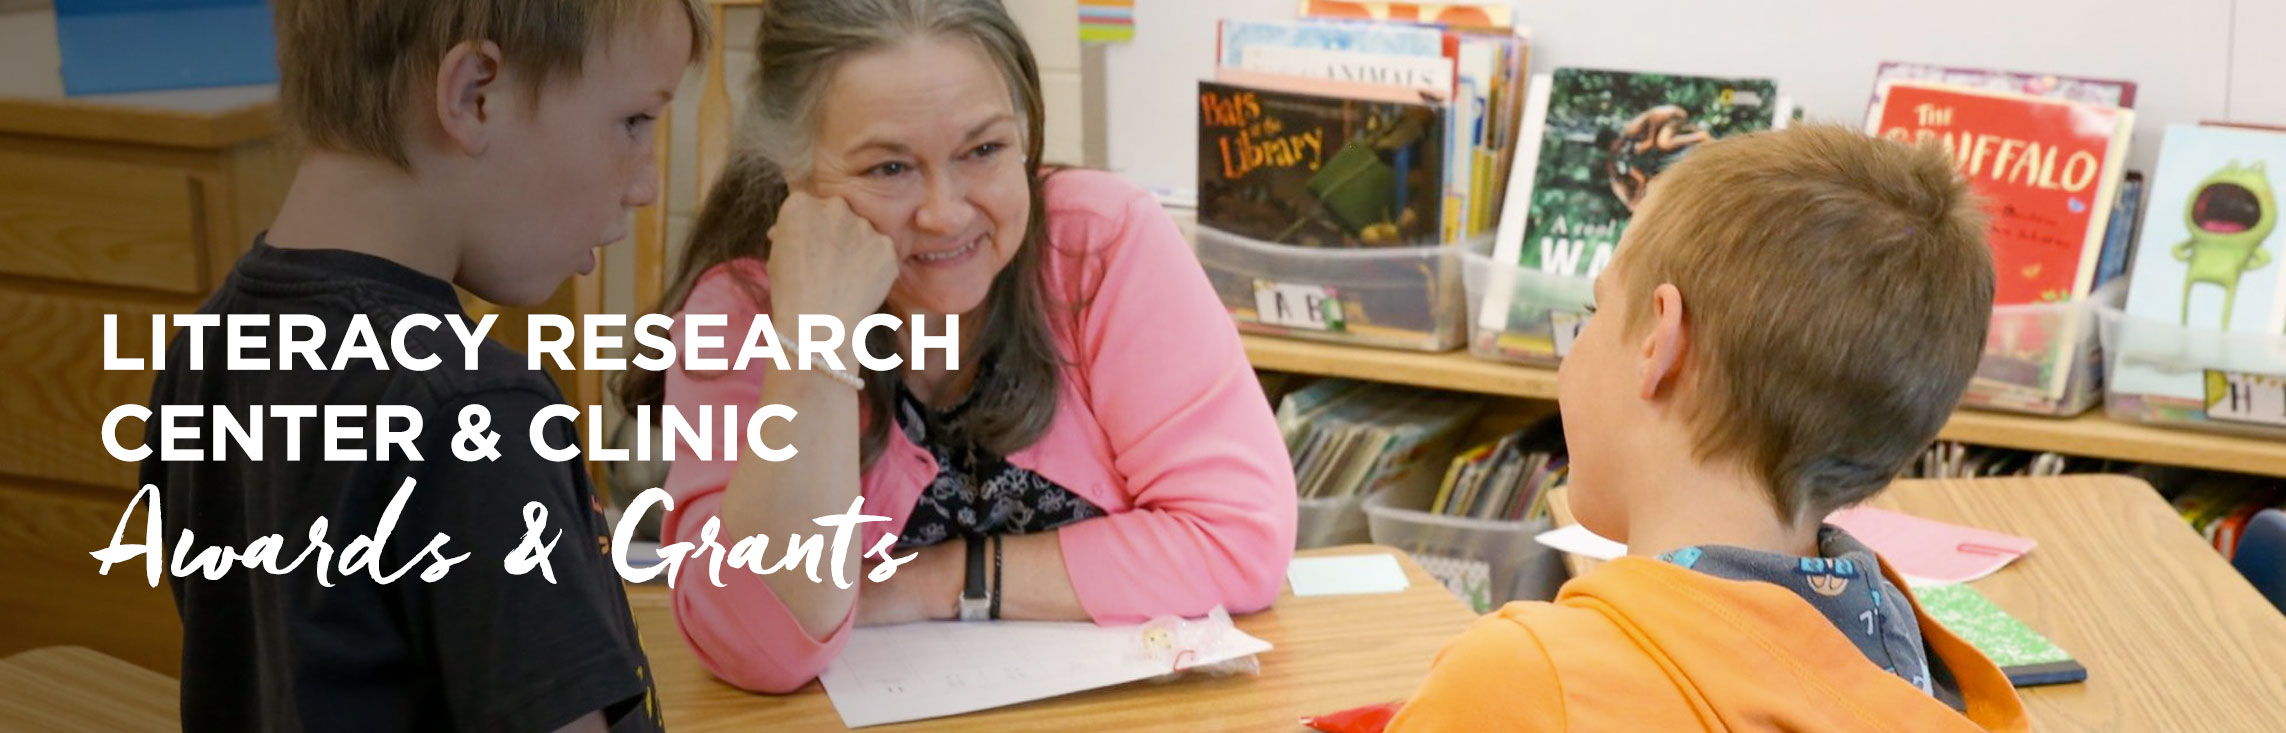 Teacher smiling with students with wording: Literacy Research Center & Clinic Awards & Grants